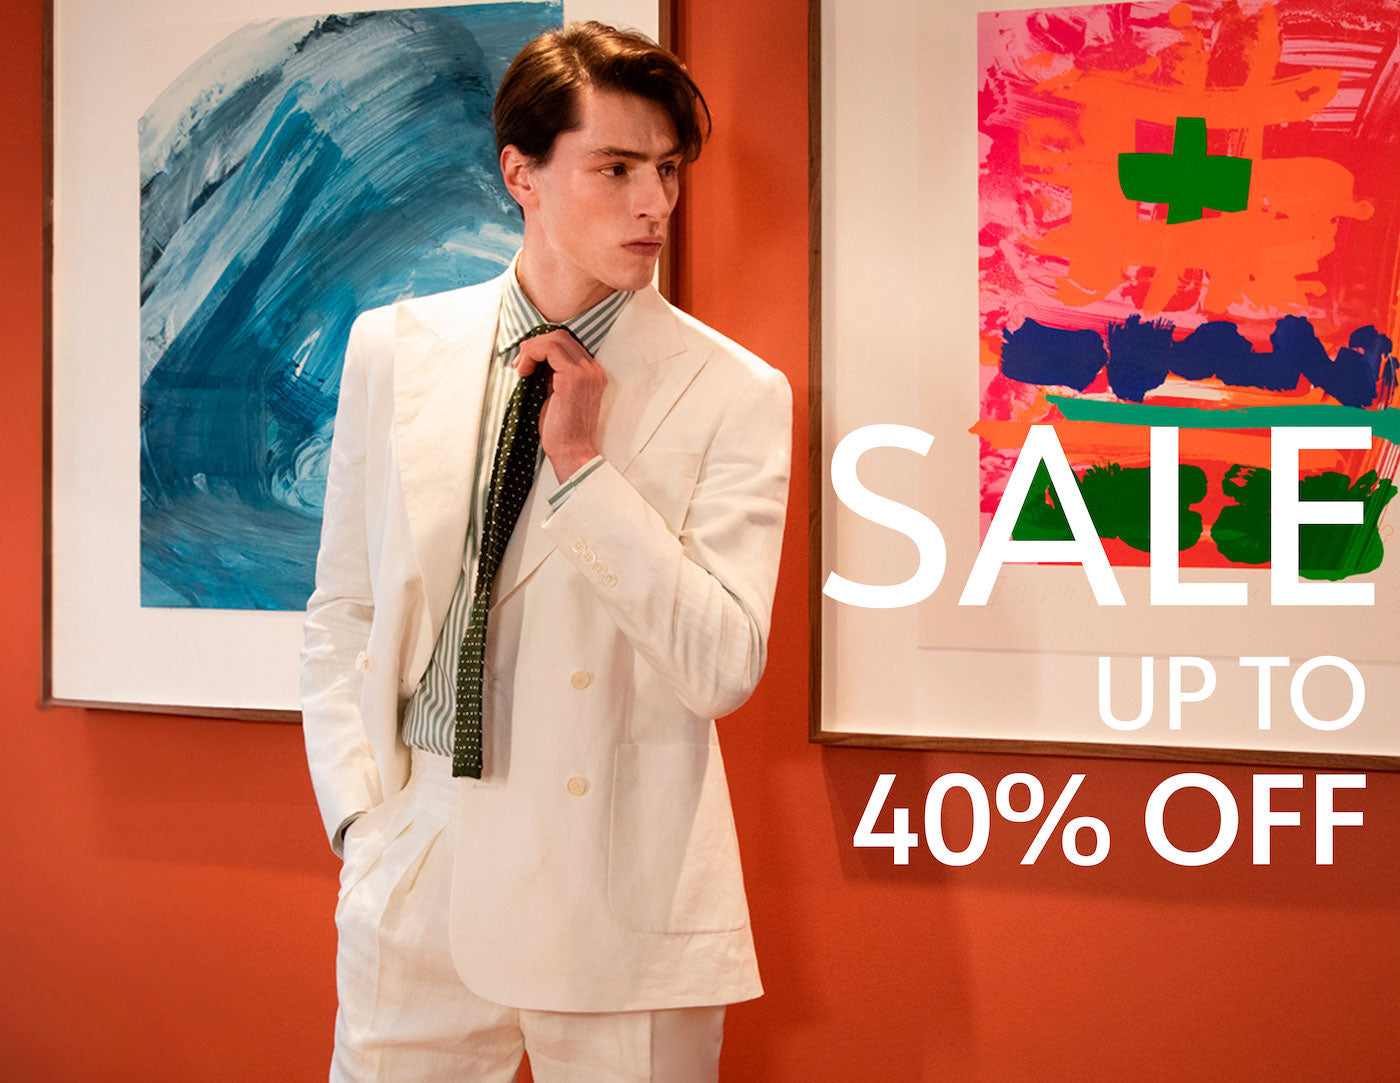 Up to 40% Off!